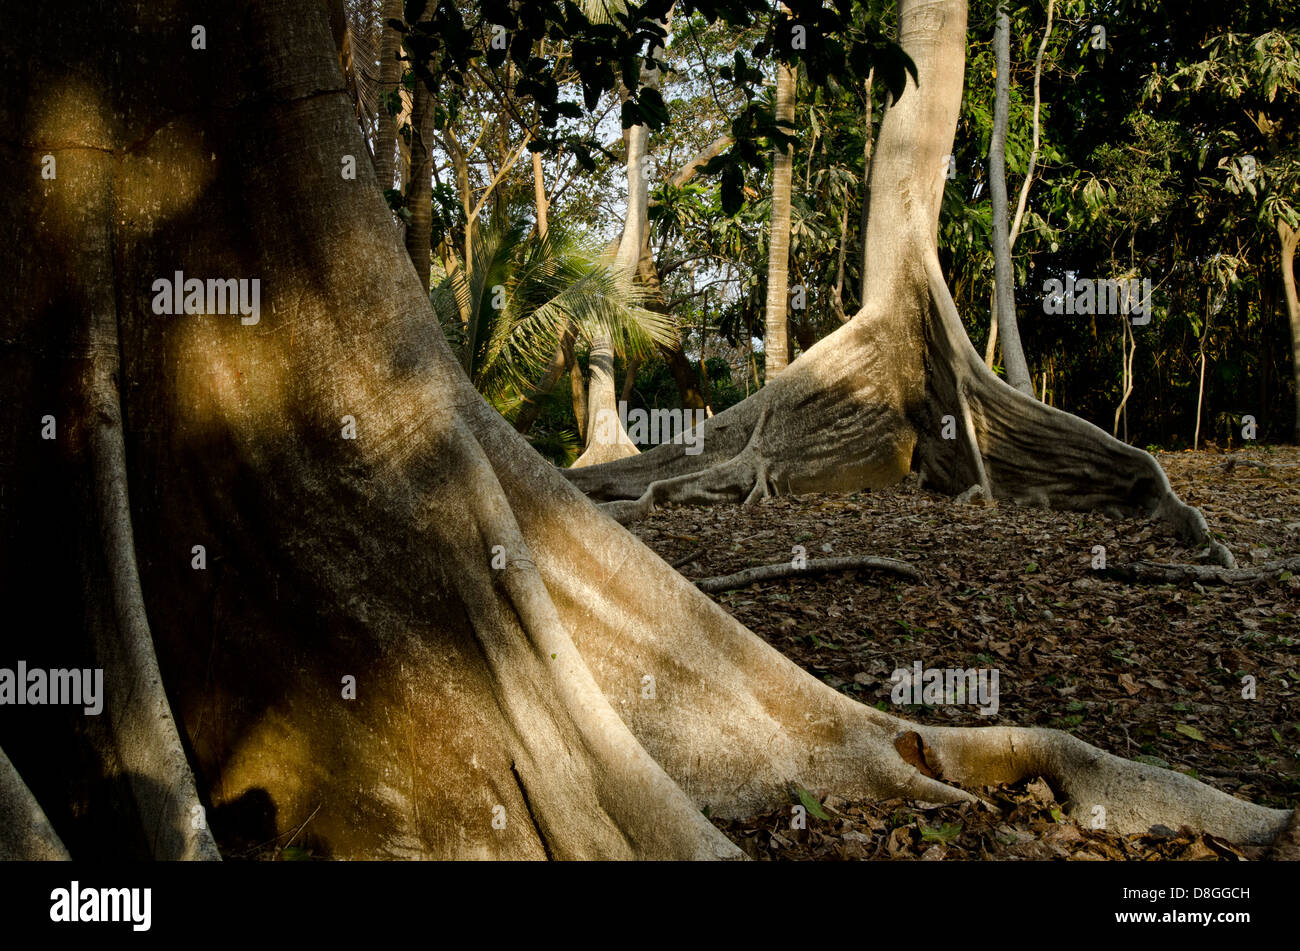 Tree with superficial roots and dried leaves on floor Stock Photo